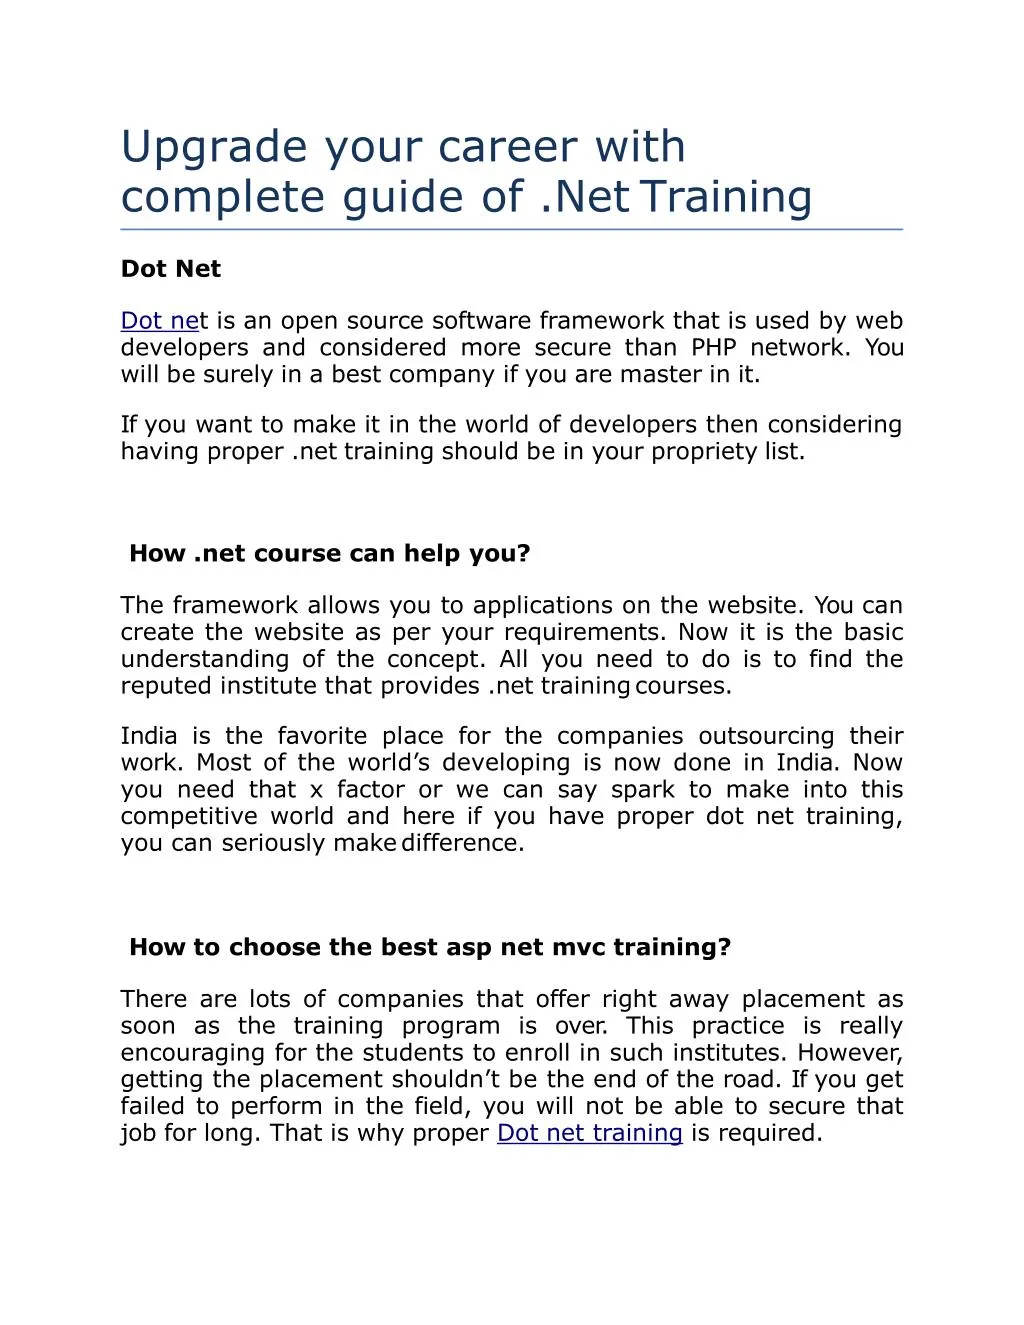 upgrade your career with complete guide of net training